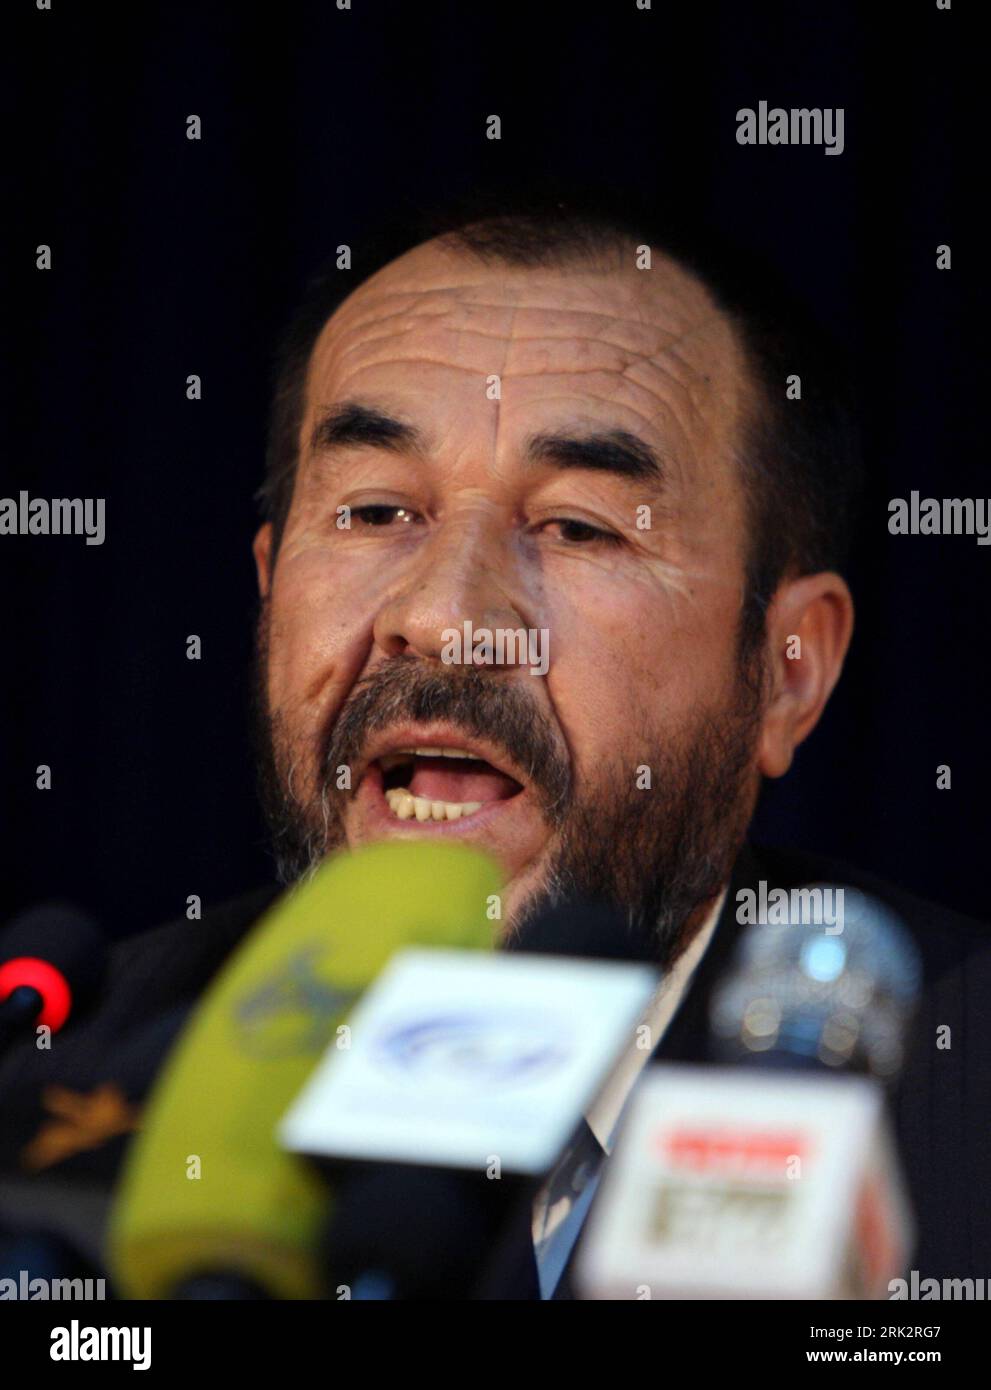 Bildnummer: 53238175  Datum: 03.08.2009  Copyright: imago/Xinhua (090803) -- KABUL, Aug. 3, 2009 (Xinhua) -- Presidential candidate Abdul Majid Samim speaks during a press conference in Kabul, capital of Afghanistan, Aug. 3, 2009. Samim withdrew from the presidential election in favor of incumbent president and presidential candidate Hamid Karzai on Monday. He is the third out of 41 presidential candidates who withdrew in favor of Karzai.     (Xinhua/Zabi Tamanna)(zx) (1)AFGHANISTAN-KABUL-ELECTION-CANDIDATE-WITHDRAWAL  PUBLICATIONxNOTxINxCHN  People Politik kbdig xkg  2009 hoch o0 Präsidentsch Stock Photo